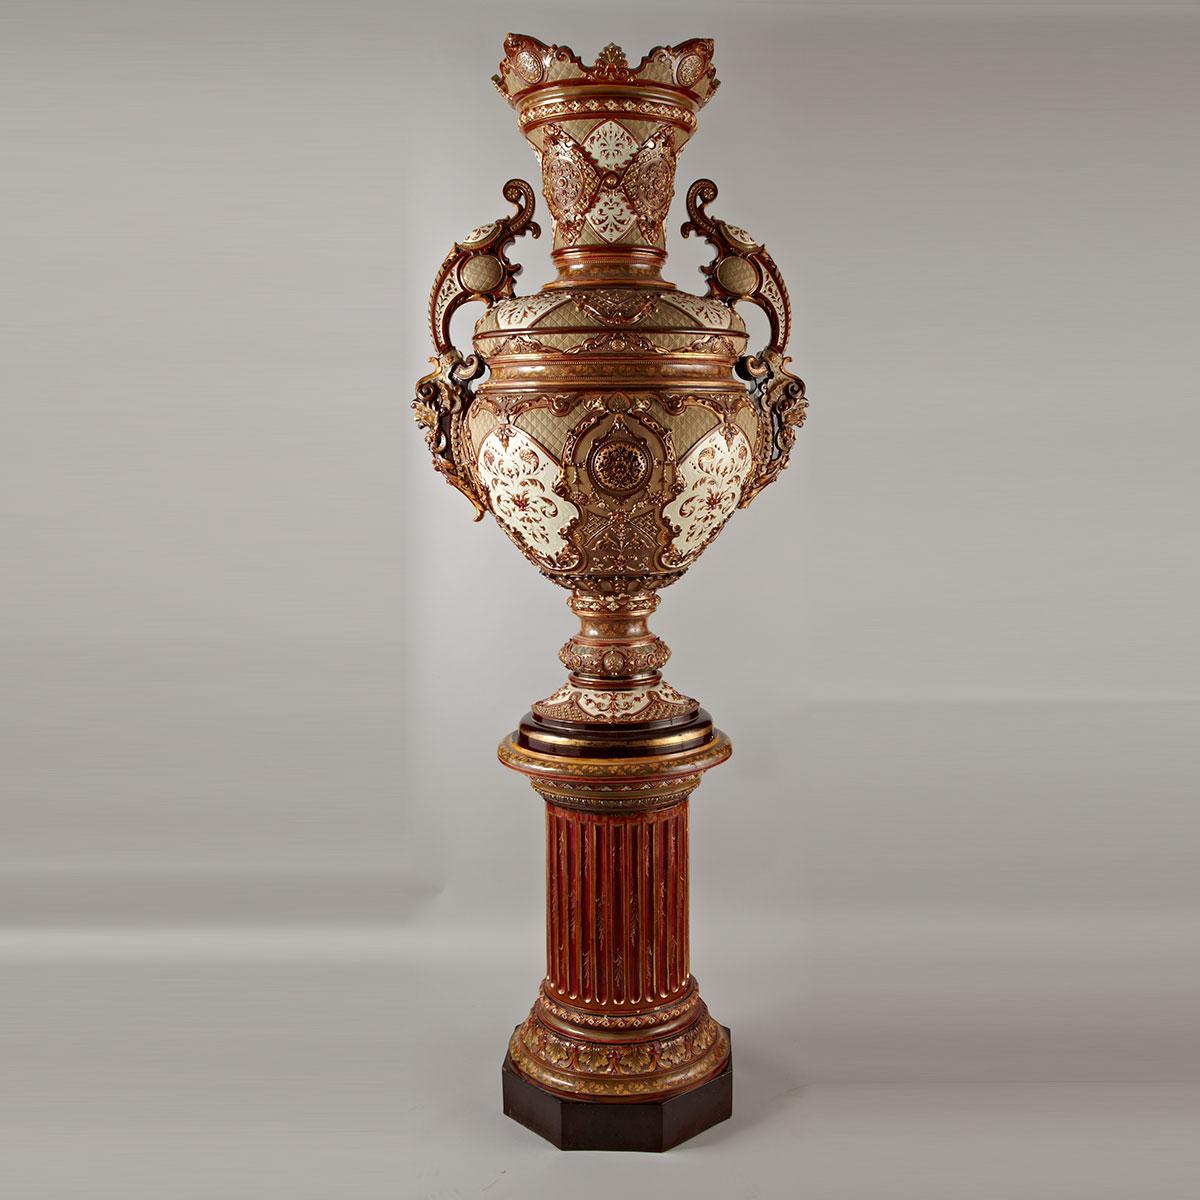 Monumental Wilhelm Schiller Majolica Two-Handled Vase on Stand, late 19th century